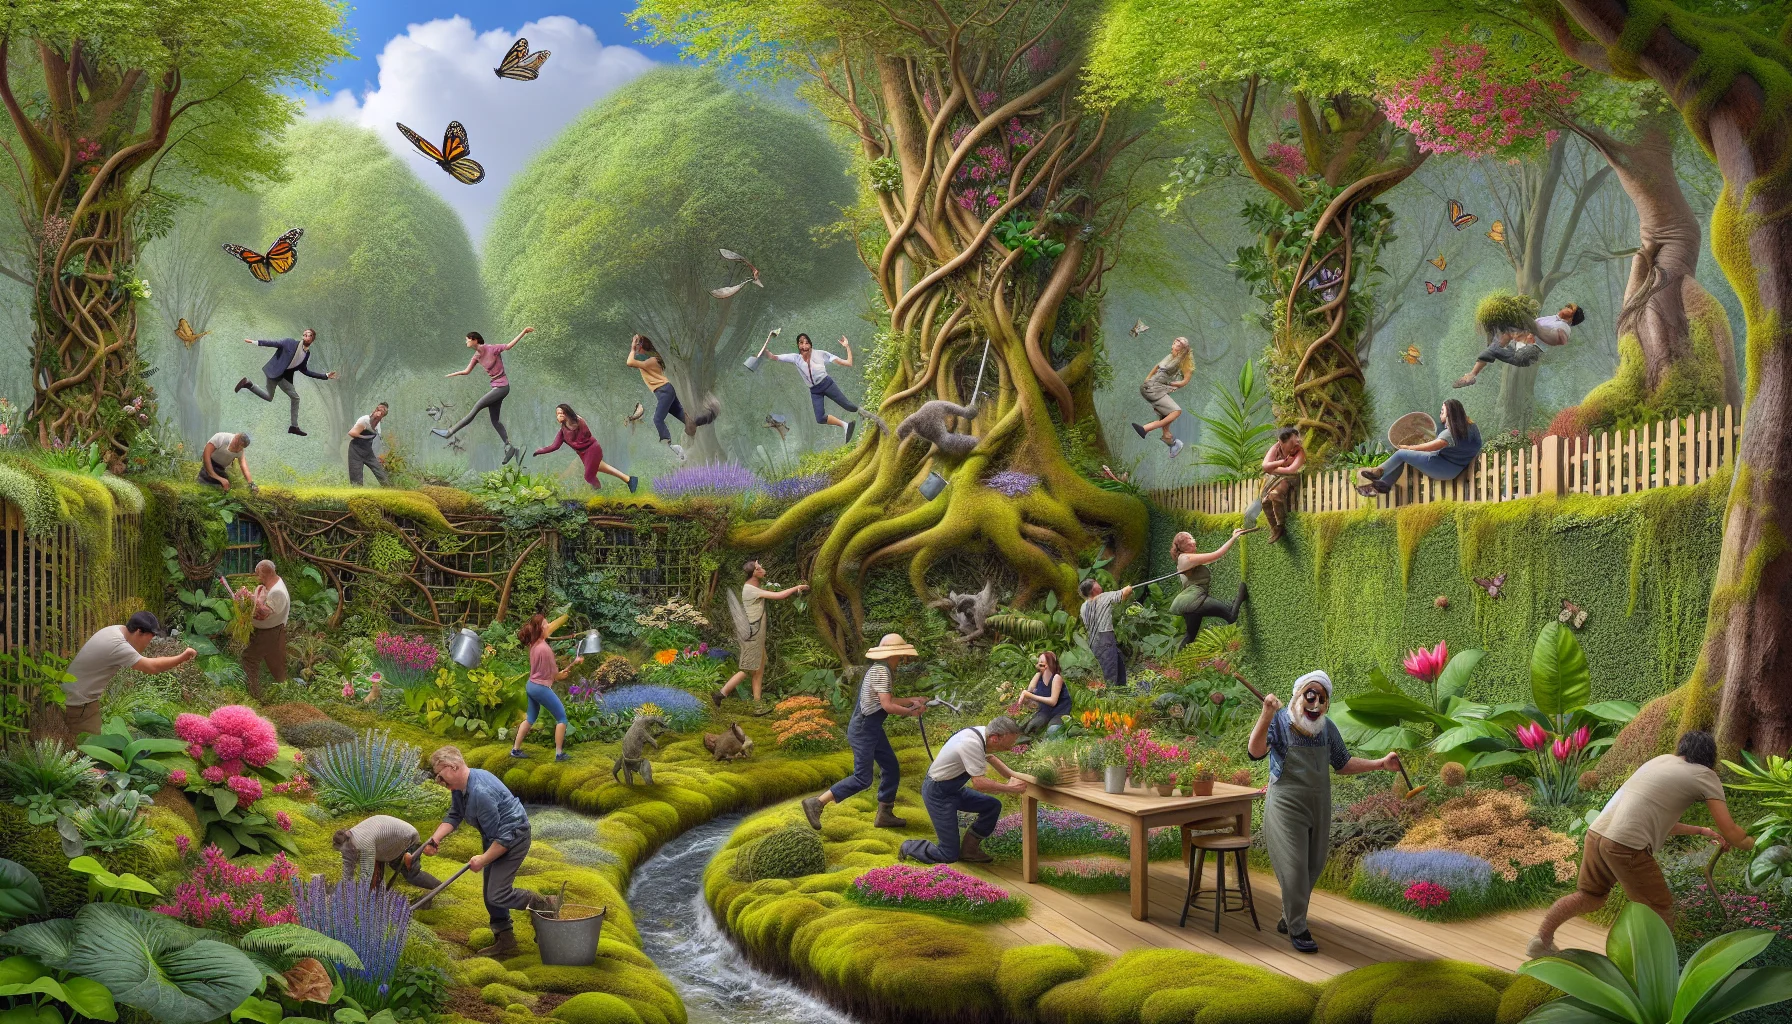 Create a humorous and highly detailed image of a woodland garden. The design of the woodland garden should be intricate and realistic, displaying a variety of native trees and vibrant flowering shrubs, with a carpet of moss and ferns underfoot. Integrate a scenario where a diverse group of people of different genders and descents such as Caucasian, Hispanic, Middle-Eastern, and Black are enthusiastically participating in gardening activities. They could be over-watering flowers, chasing a butterfly away, or laughing while trying to disentangle from a clinging vine. This image should provoke a sense of humor and inspire people to engage in gardening.